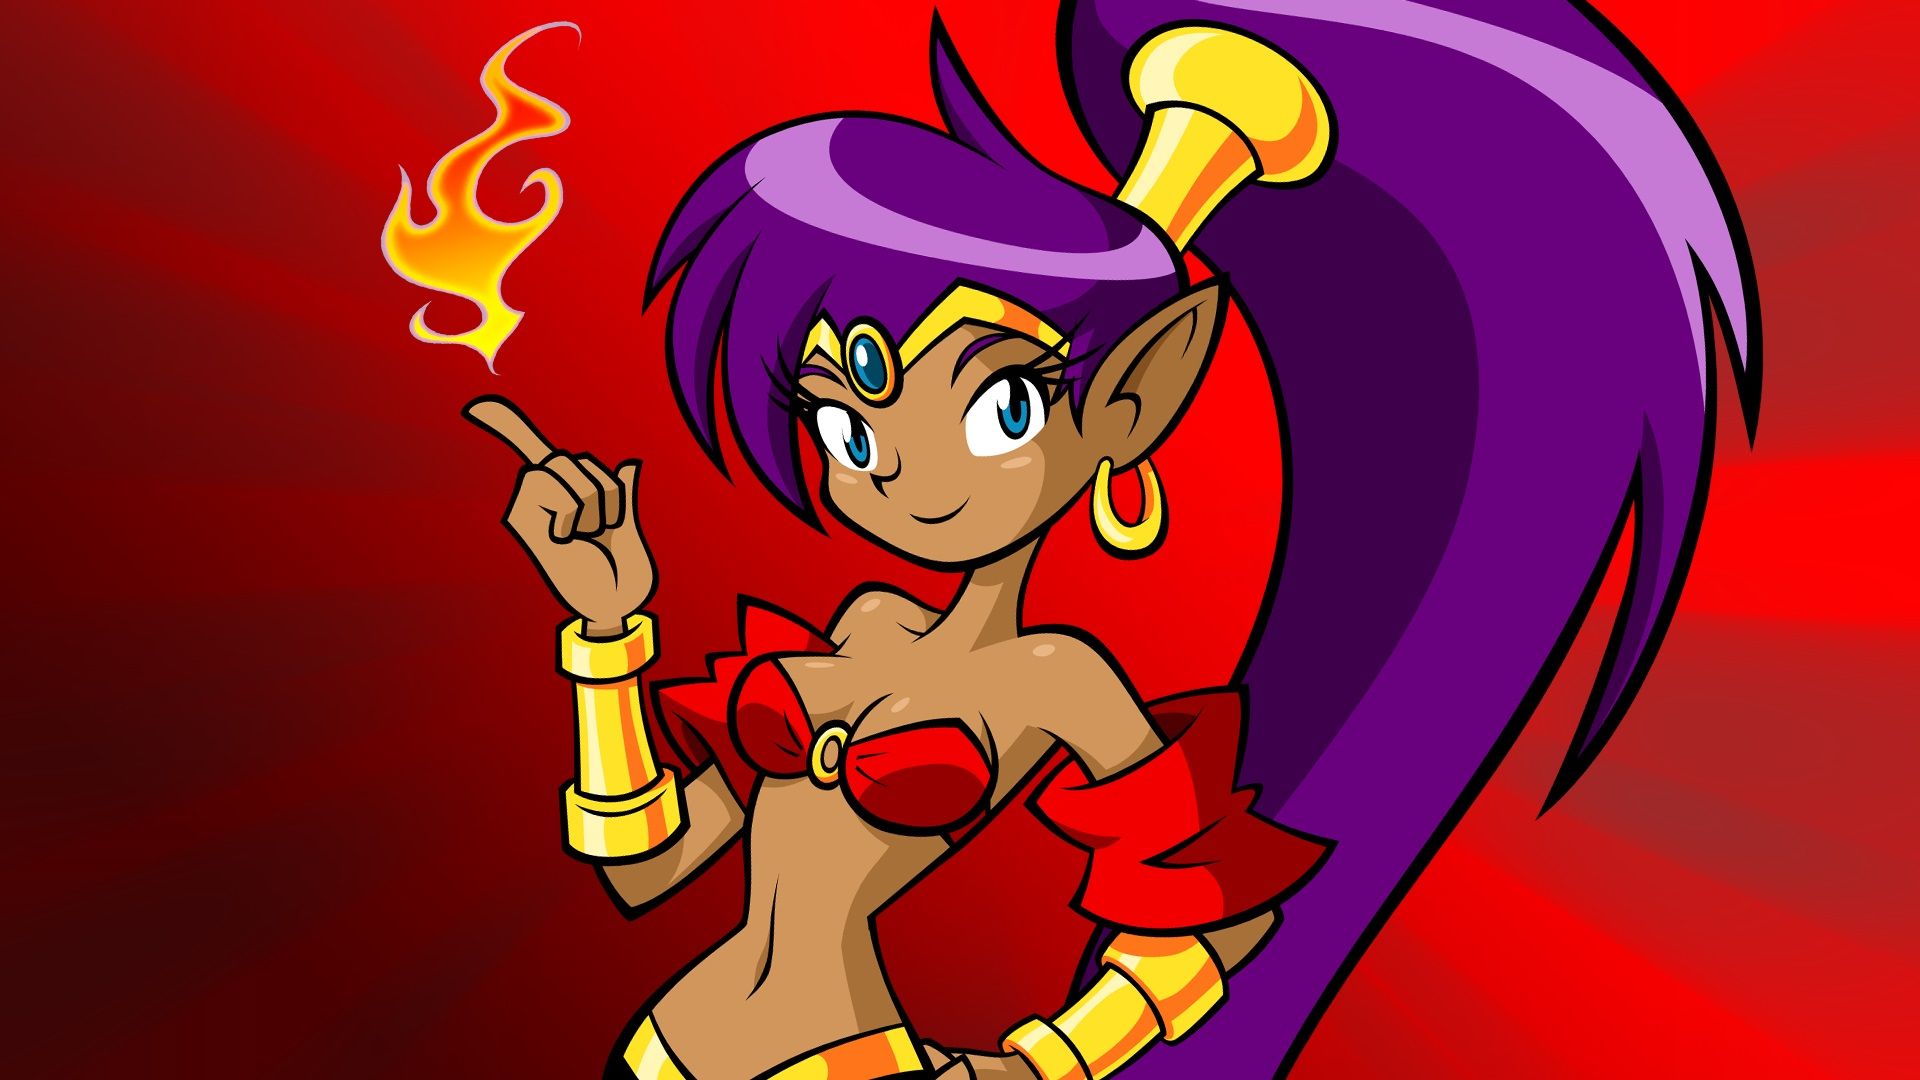 Shantae breast and butt expansion bouncing